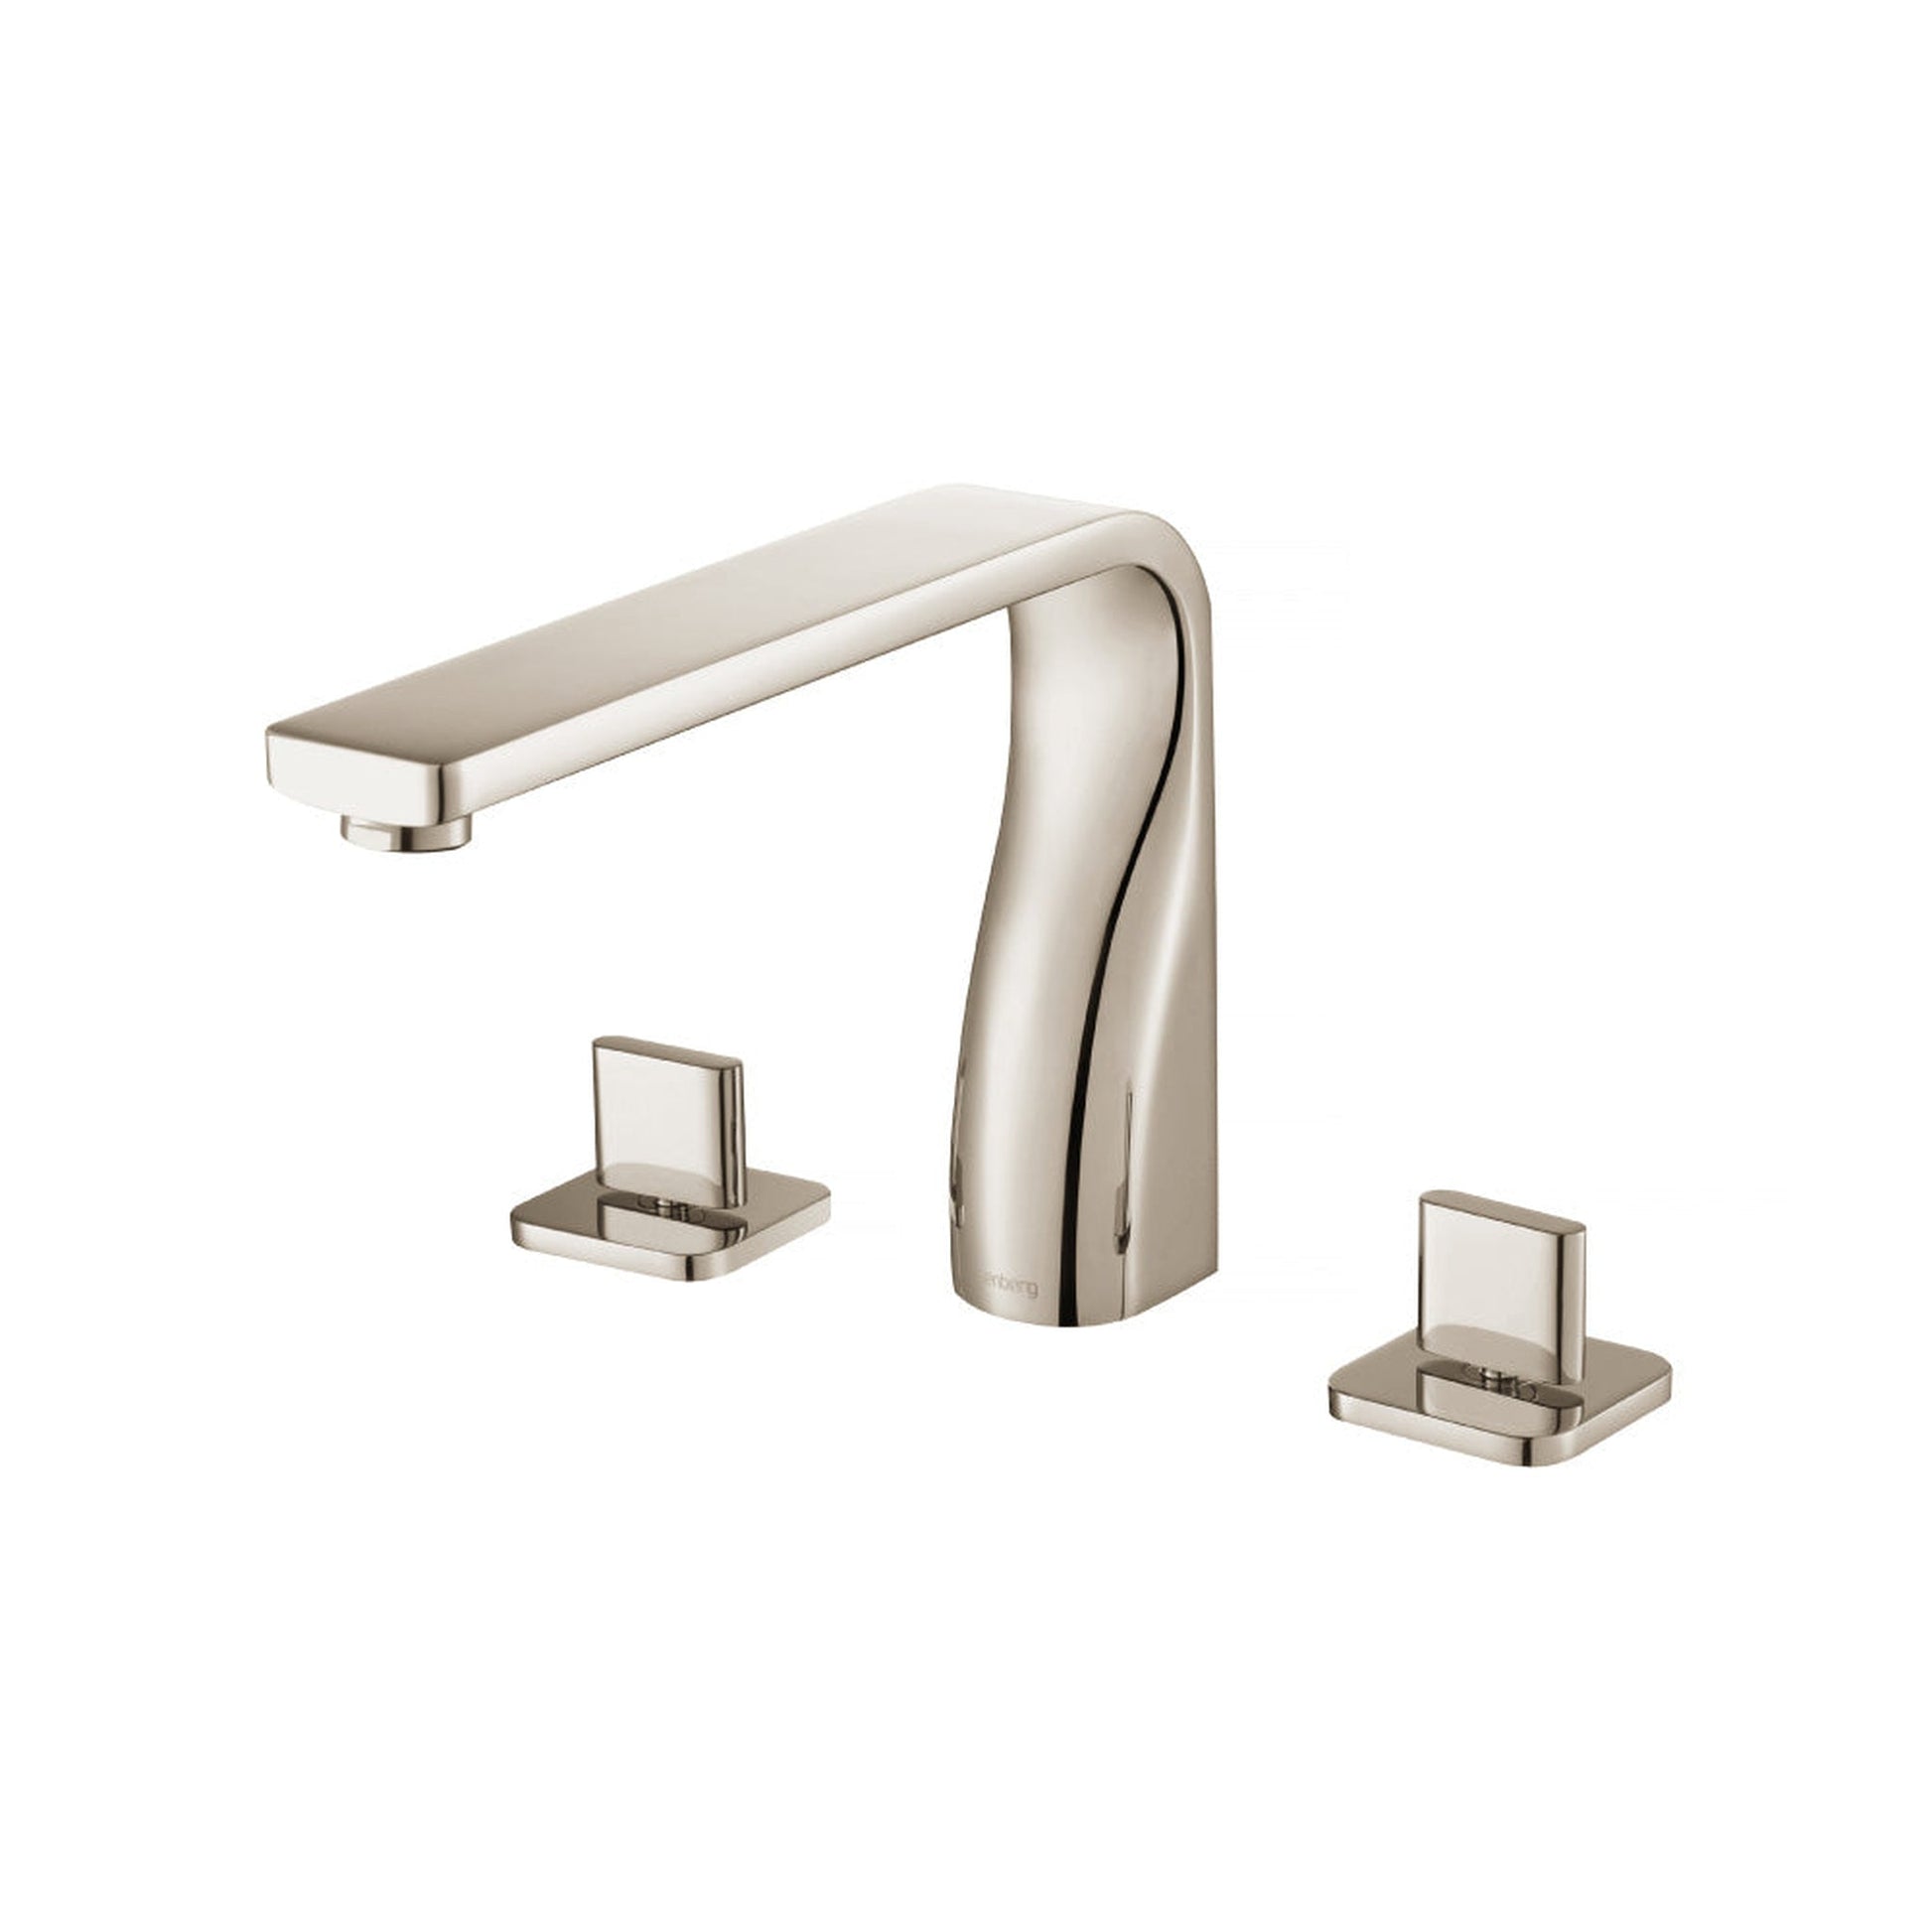 Isenberg Serie 260 8" Three-Hole Polished Nickel PVD Solid Brass Deck-Mounted Roman Bathtub Faucet